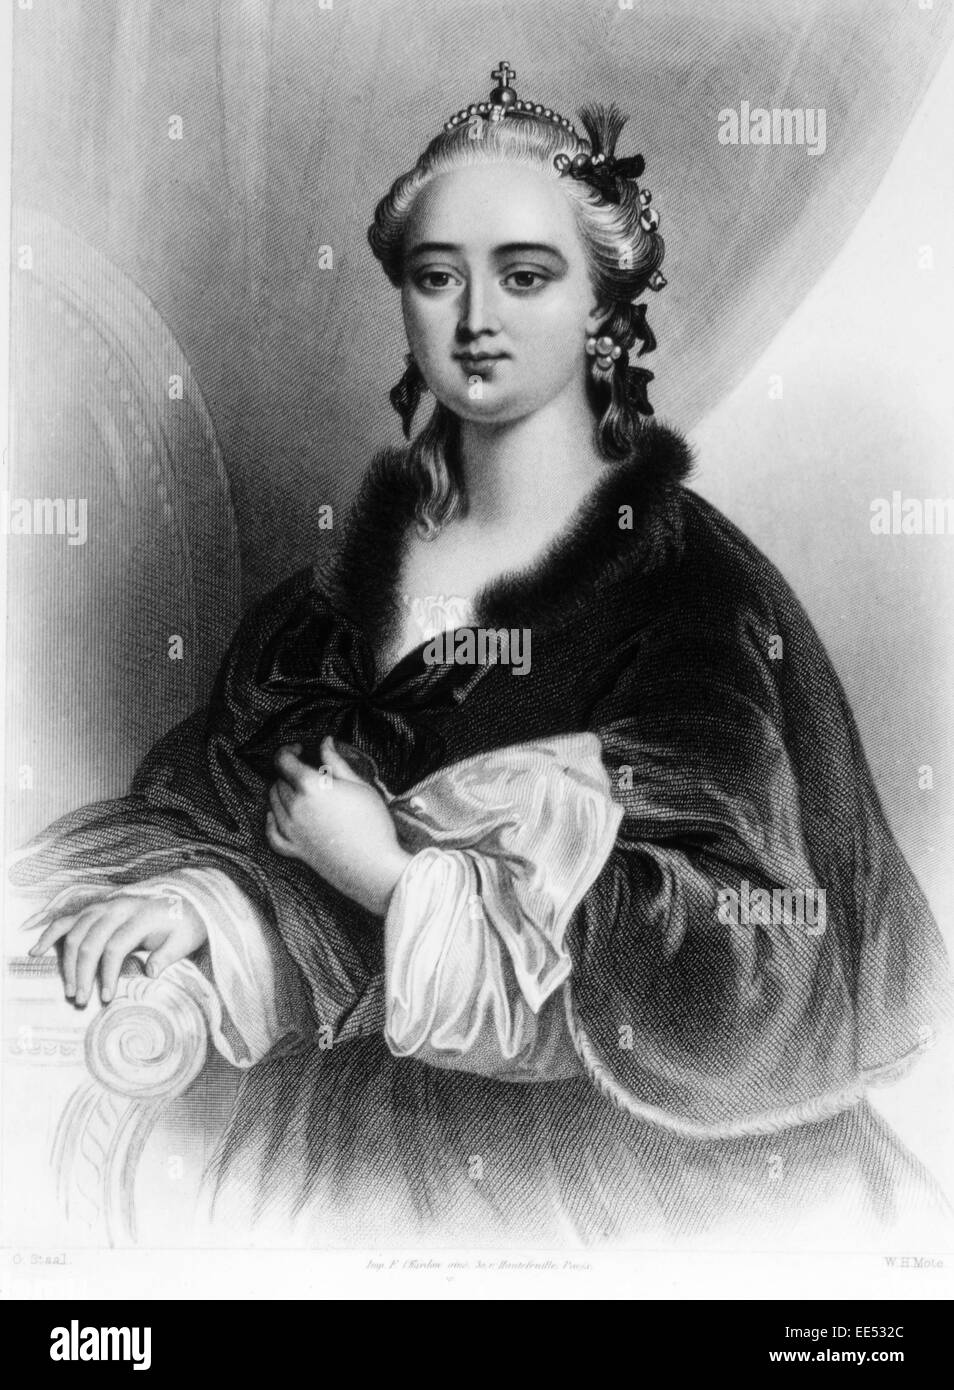 Catherine II (1729-1796), or Catherine the Great, Czarina of Russia, 1762-1796, Portrait, Engraving,  1857 Stock Photo